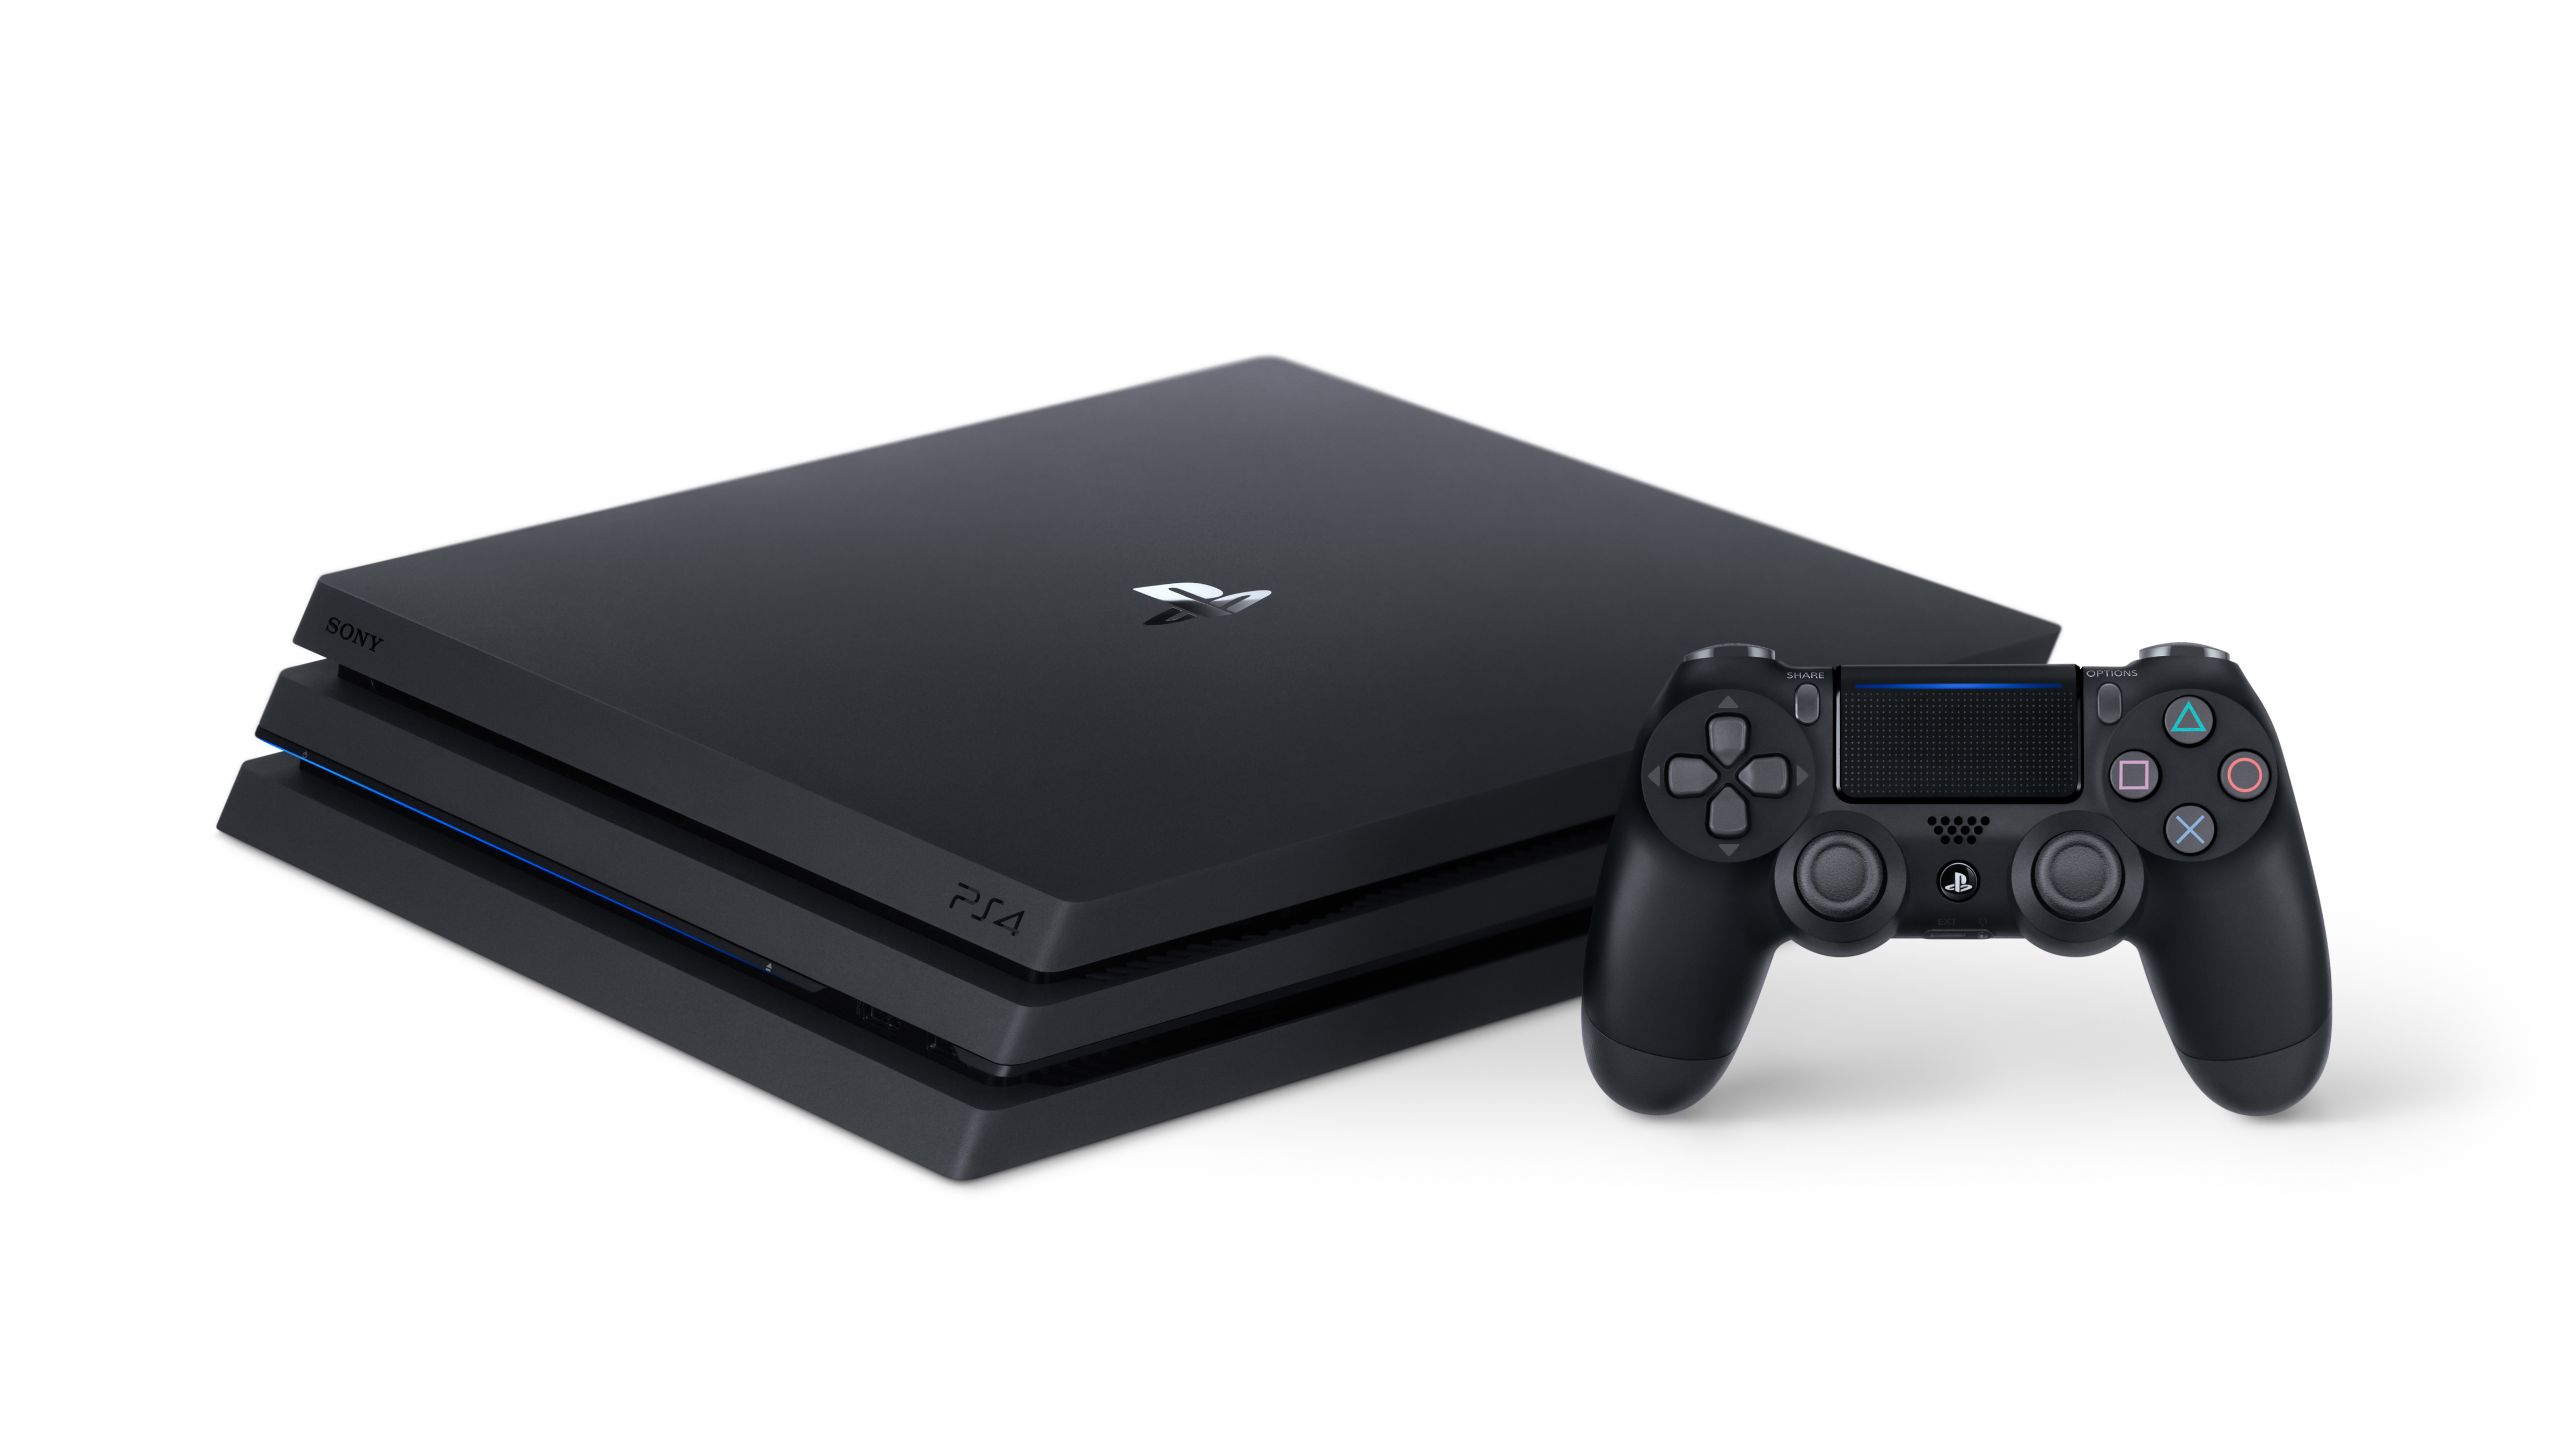 free ps4 pro with phone contract